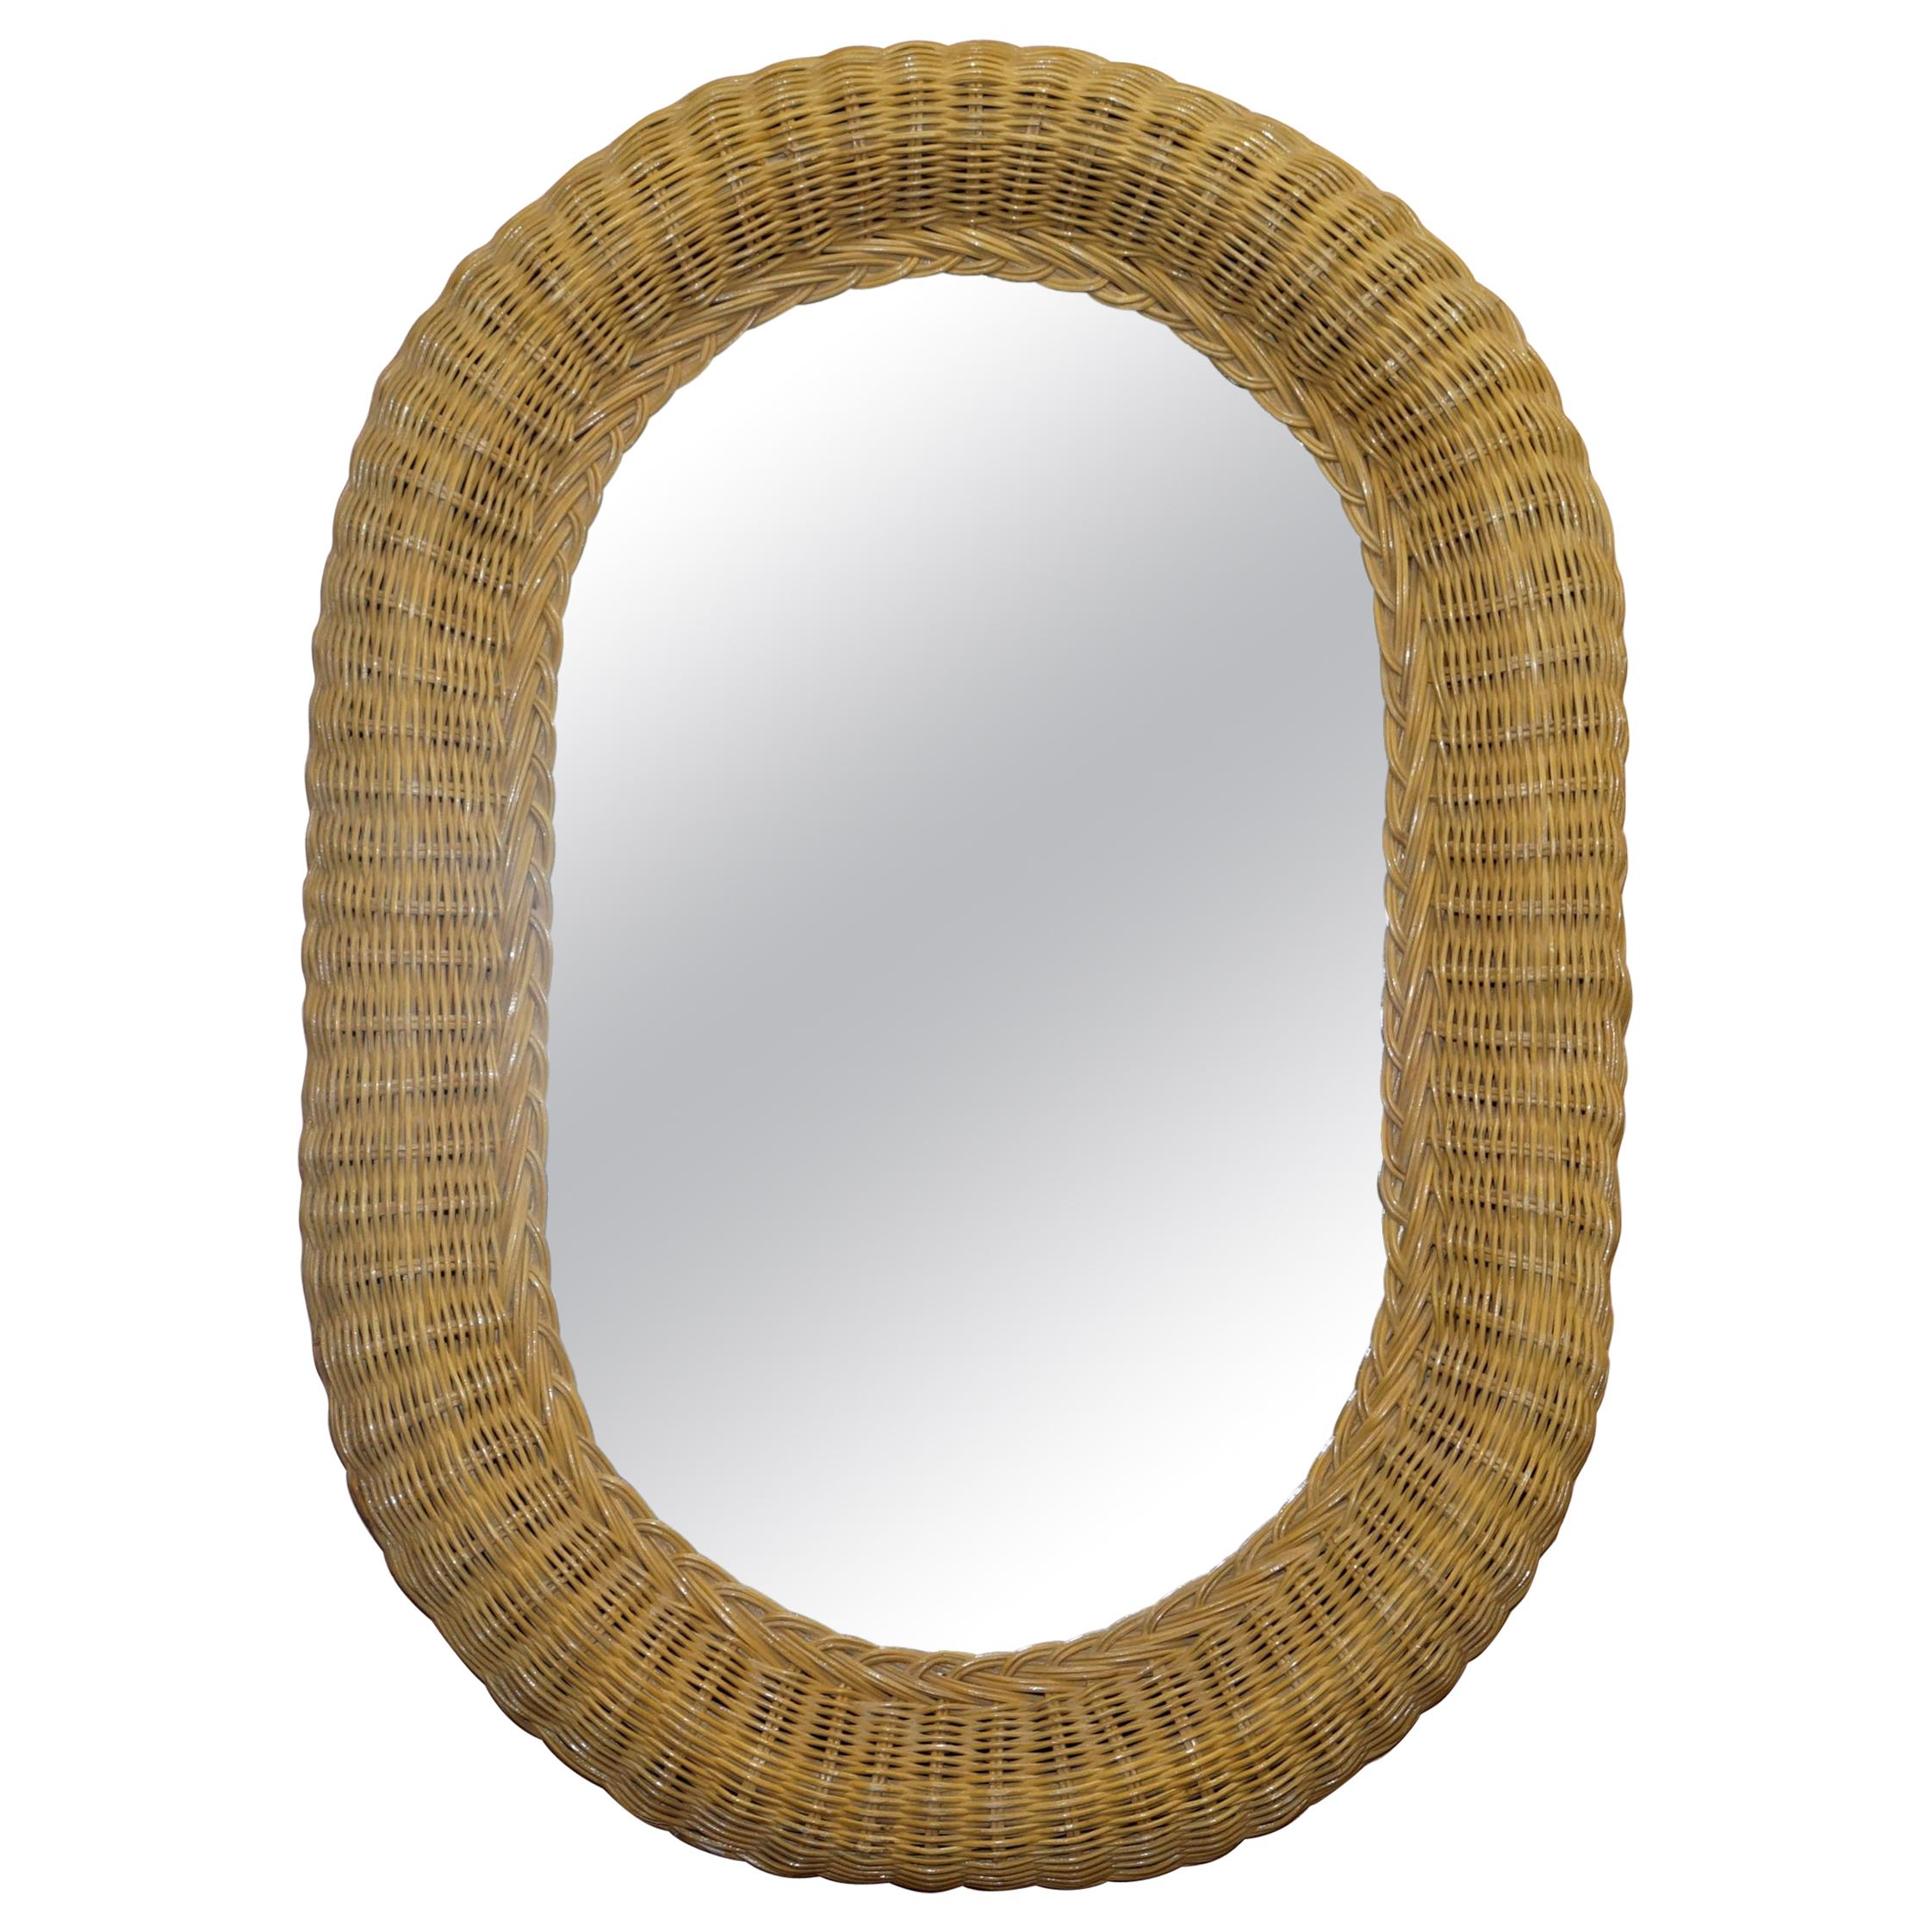 Nice Ornate Wicker Oval Wall Mounted Mirror Ornately Handwoven